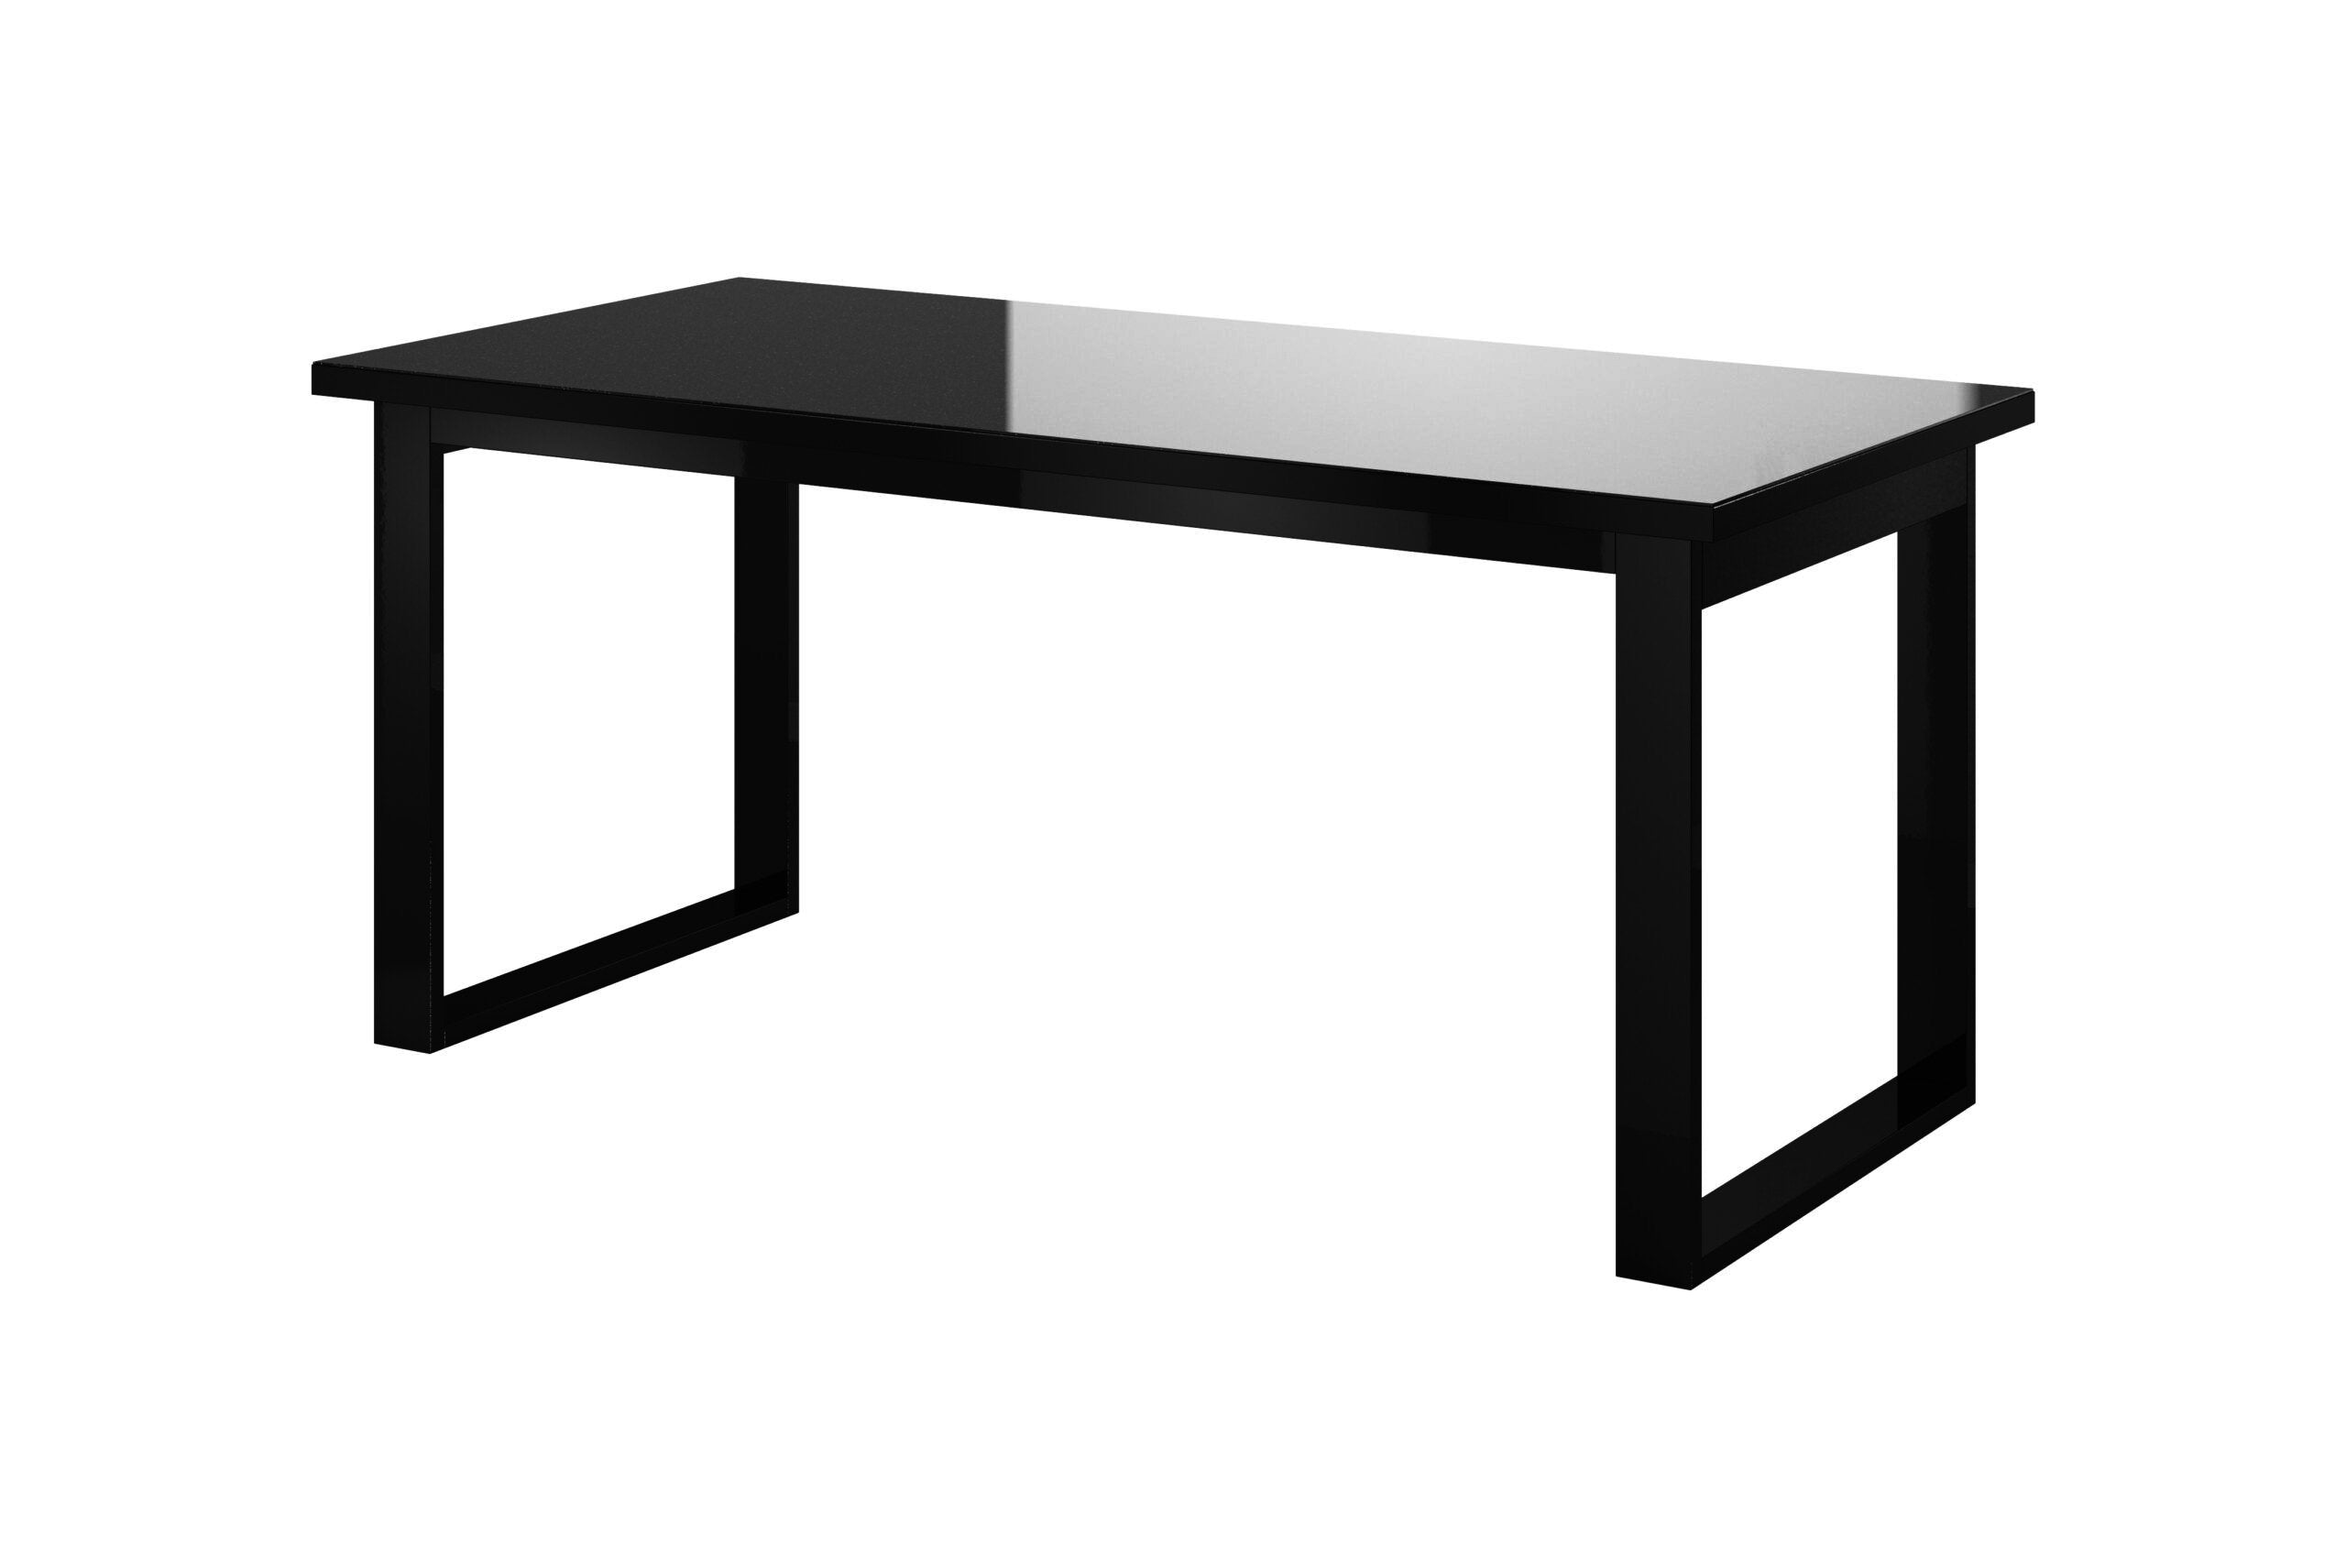 View Helio 92 Extending Table Black Glass 170cm Yes information